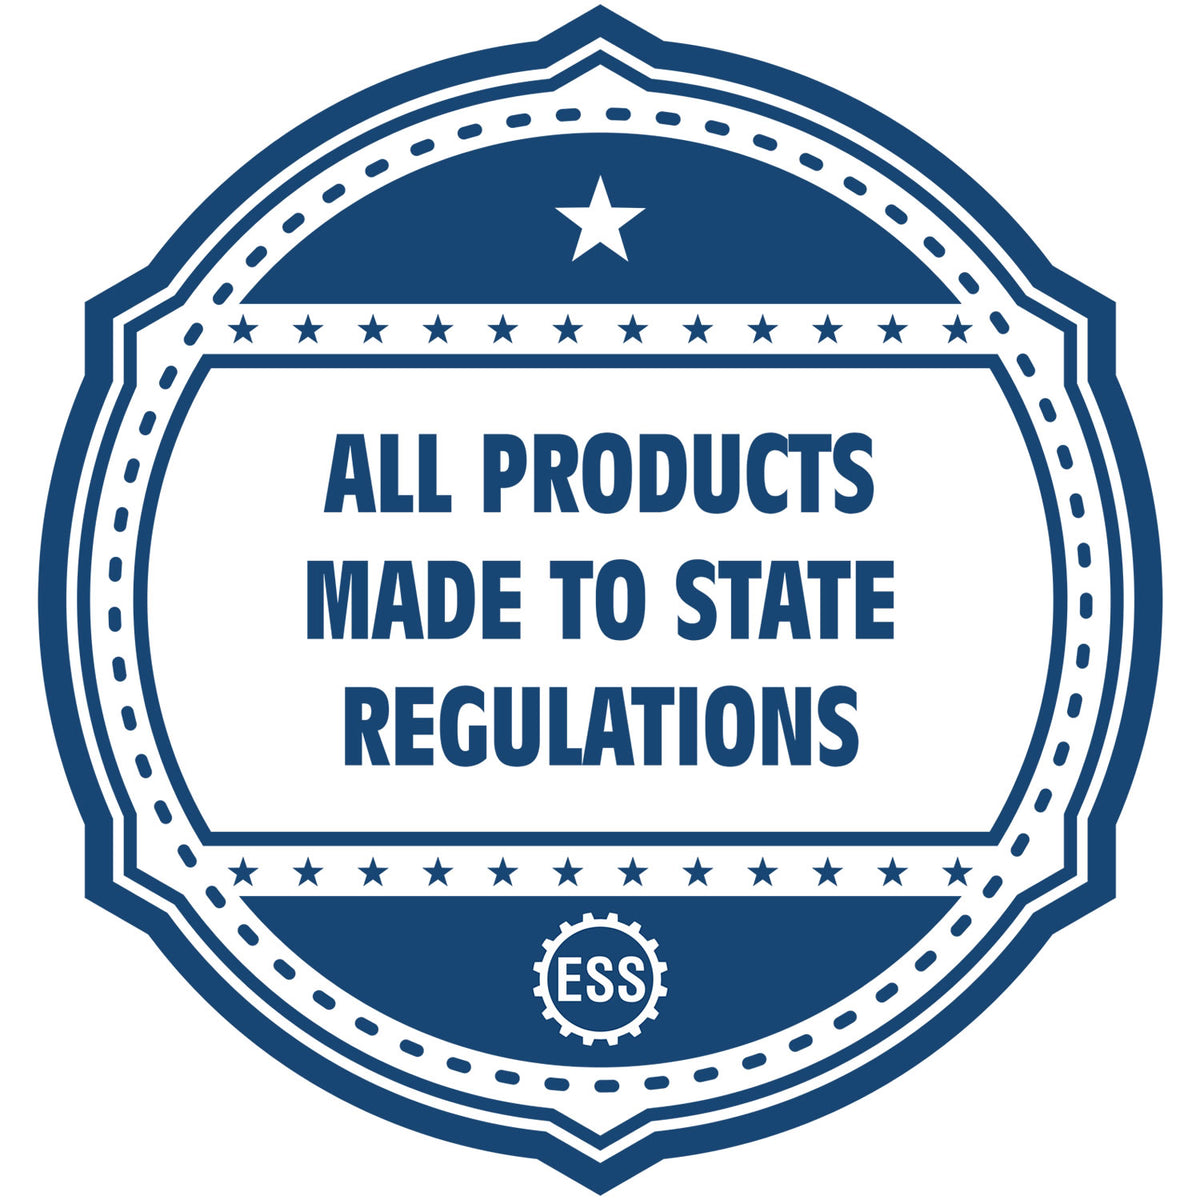 An icon or badge element for the Self-Inking Rectangular Pennsylvania Notary Stamp showing that this product is made in compliance with state regulations.